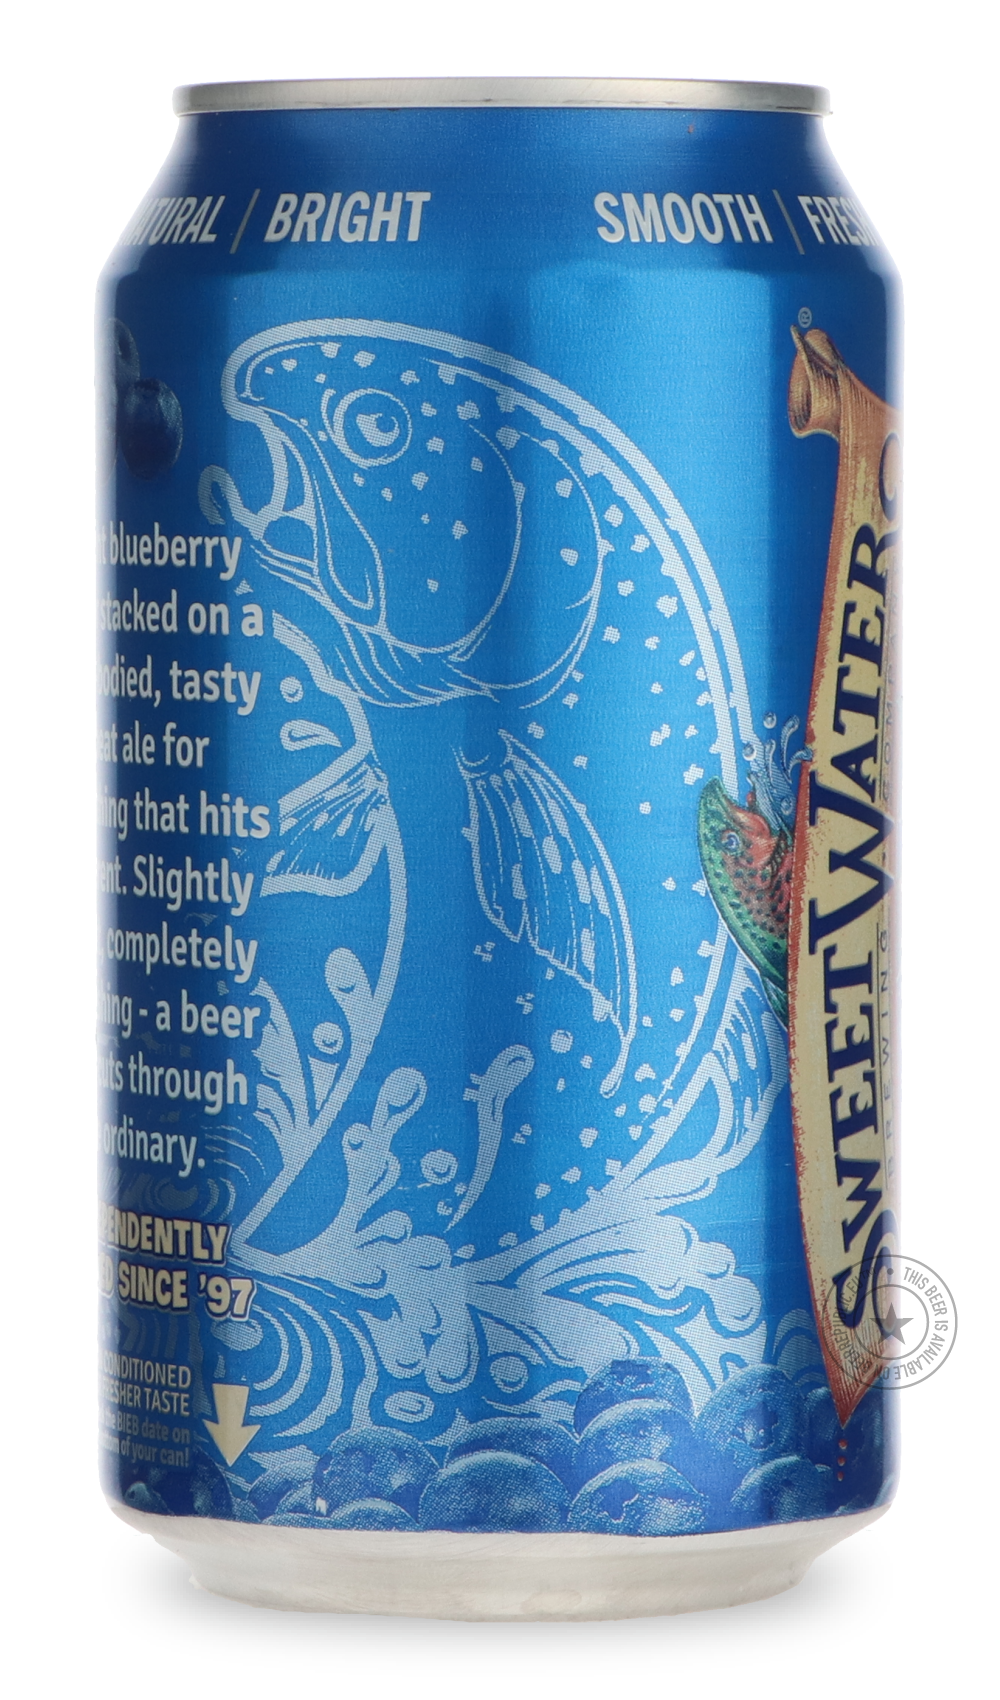 -SweetWater- Blue-Sour / Wild & Fruity- Only @ Beer Republic - The best online beer store for American & Canadian craft beer - Buy beer online from the USA and Canada - Bier online kopen - Amerikaans bier kopen - Craft beer store - Craft beer kopen - Amerikanisch bier kaufen - Bier online kaufen - Acheter biere online - IPA - Stout - Porter - New England IPA - Hazy IPA - Imperial Stout - Barrel Aged - Barrel Aged Imperial Stout - Brown - Dark beer - Blond - Blonde - Pilsner - Lager - Wheat - Weizen - Amber 